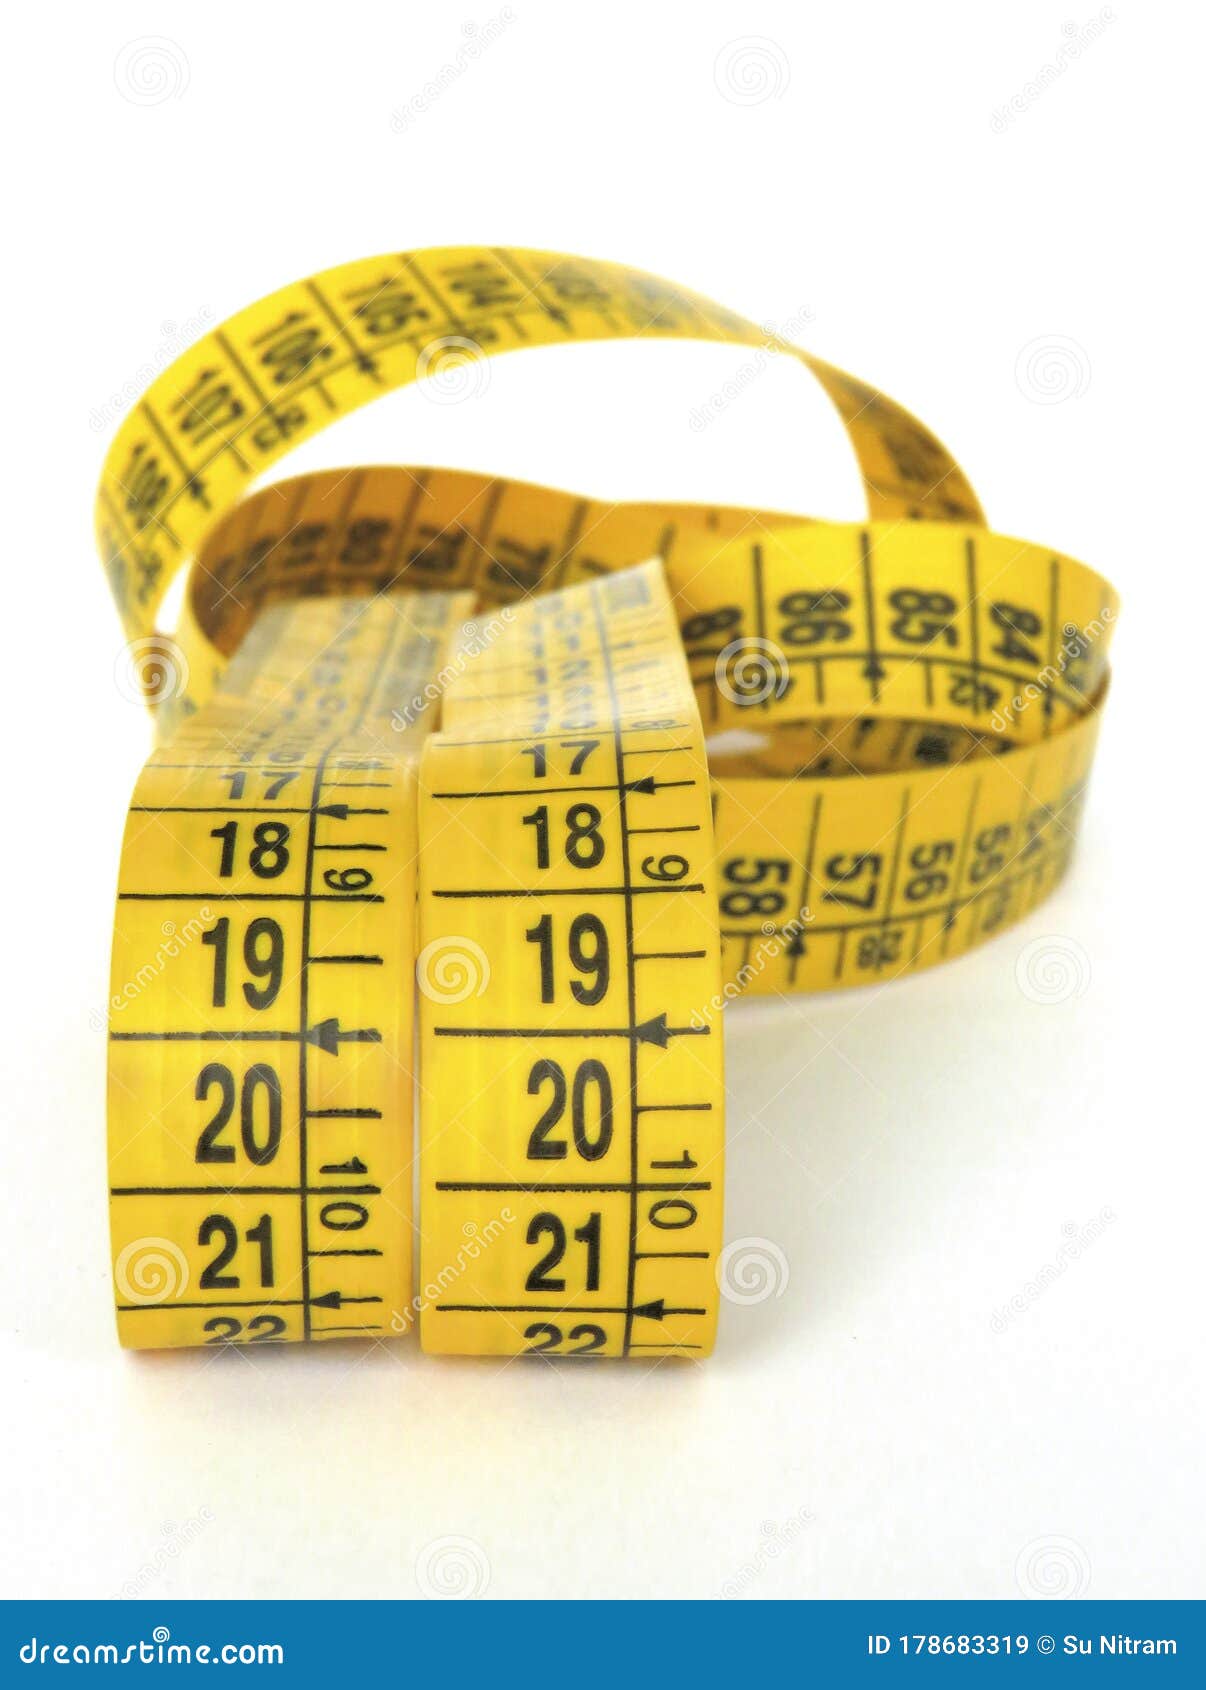 https://thumbs.dreamstime.com/z/yellow-sewing-tape-measure-isolated-white-background-front-view-body-measurement-ruler-centimeters-inches-178683319.jpg